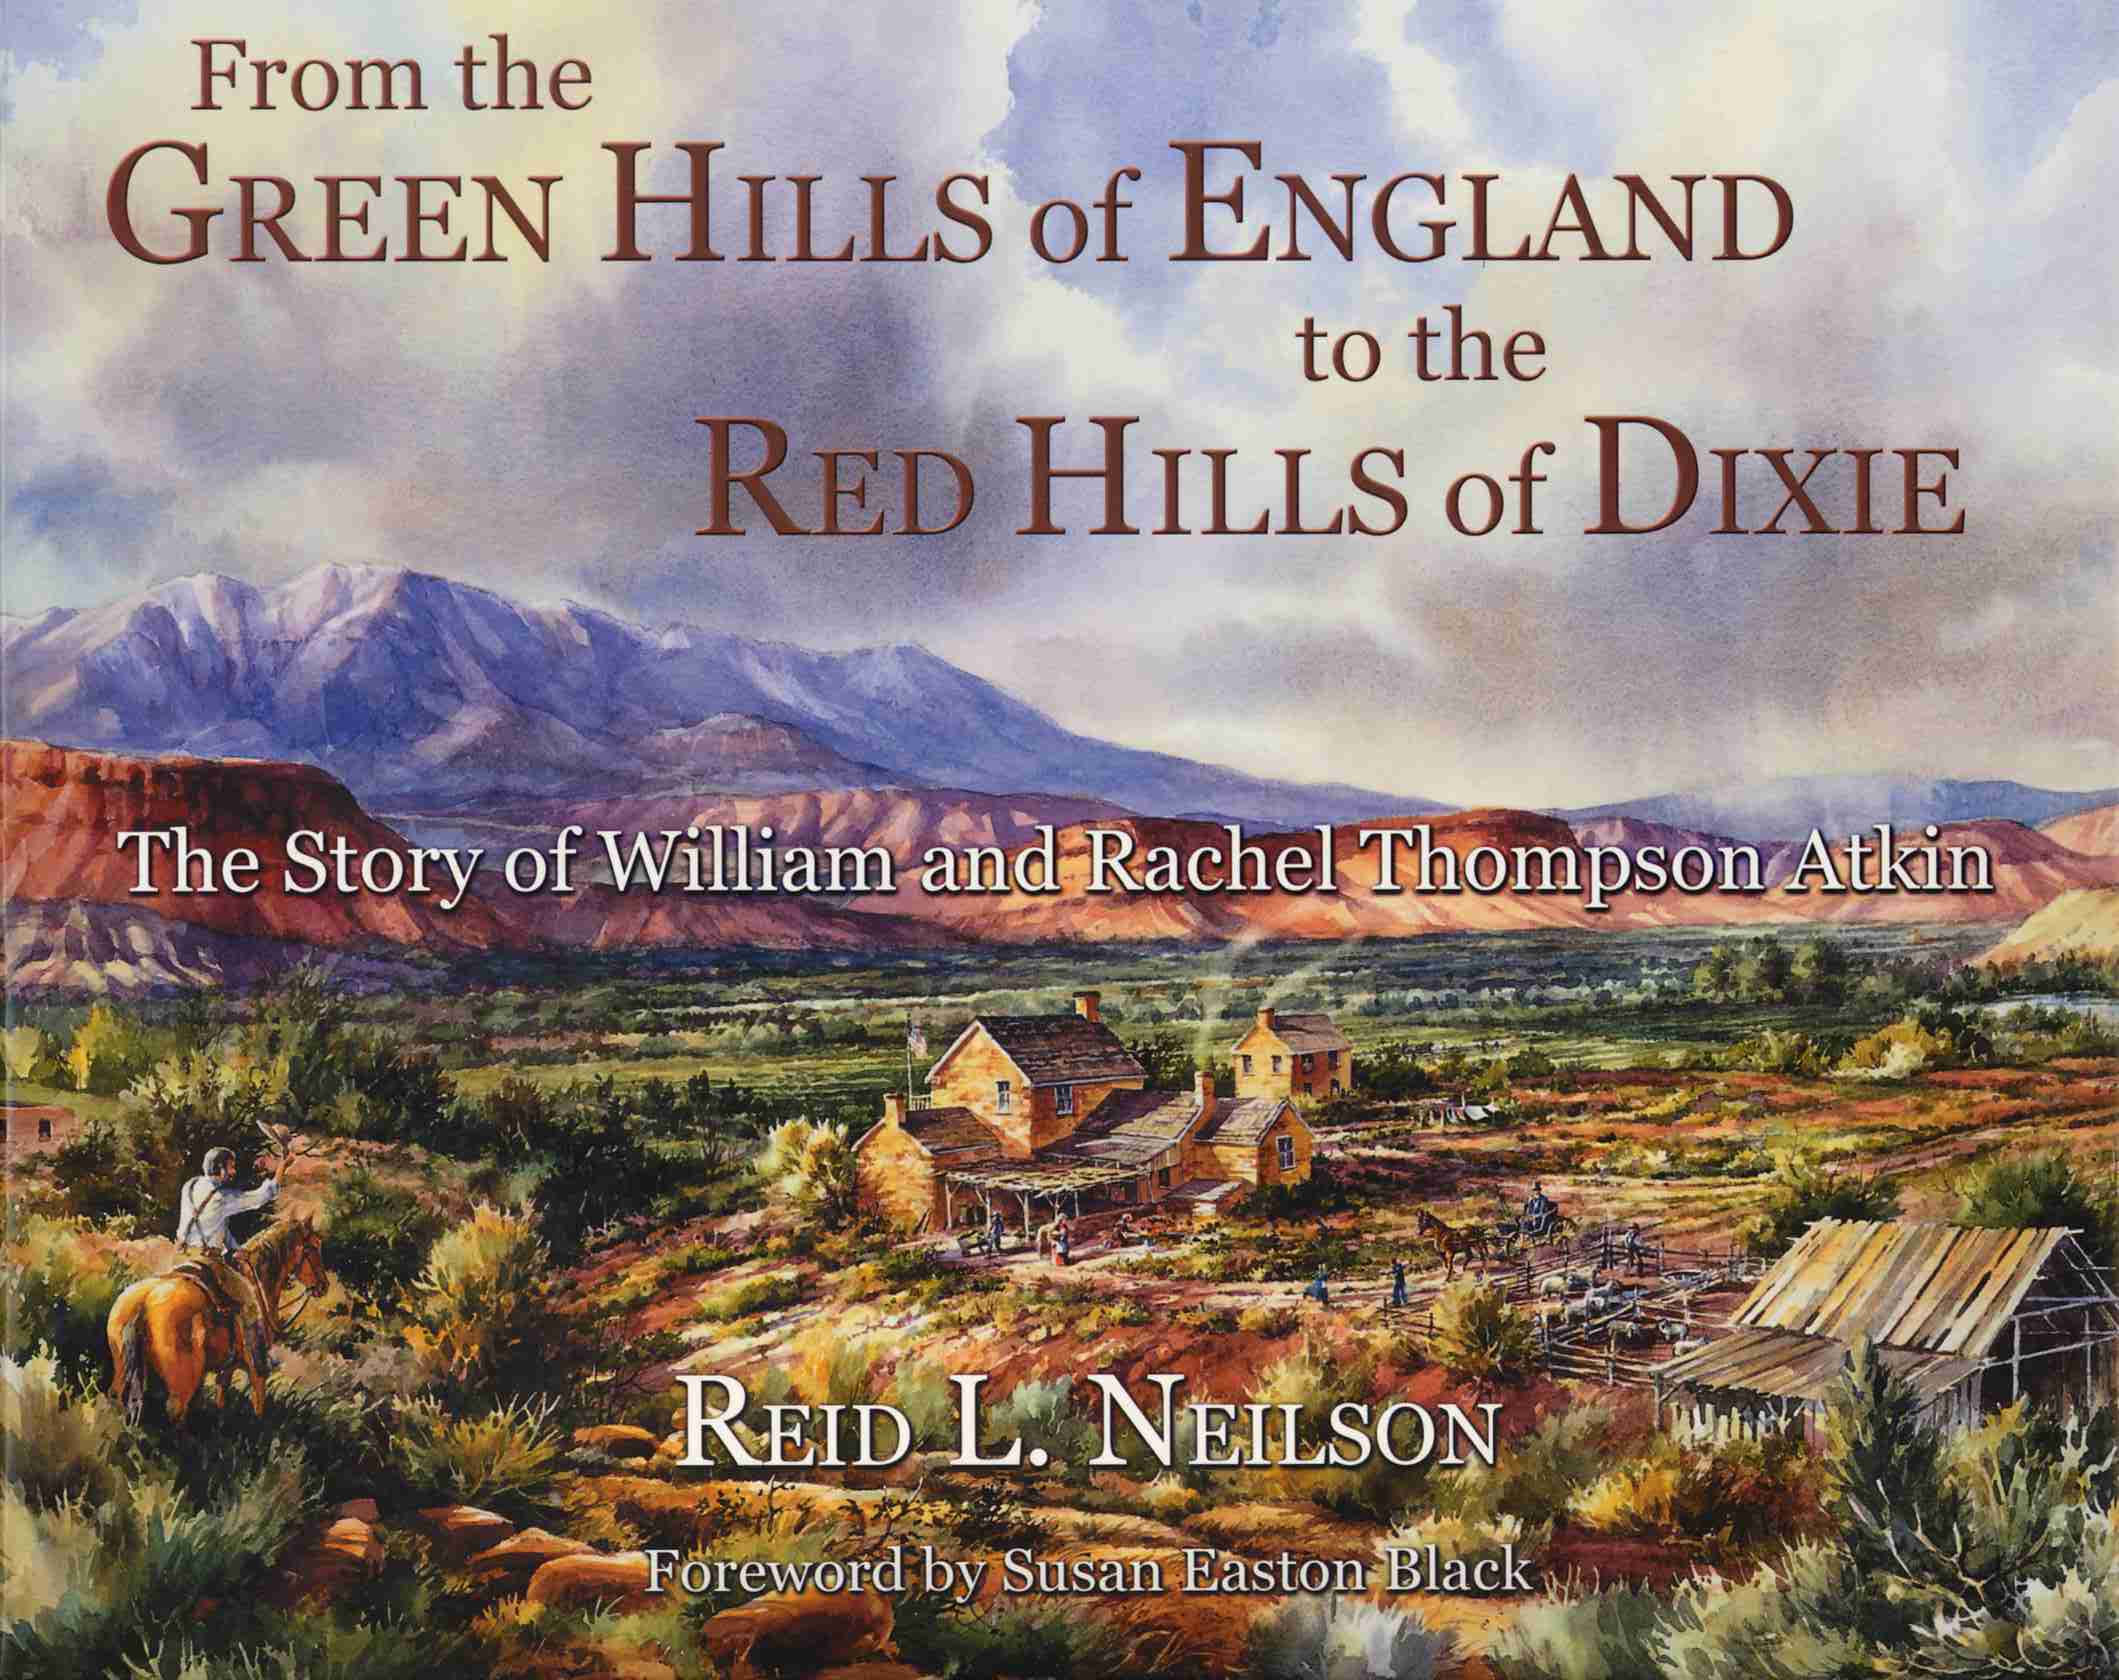 Book: From the Green Hills of England to the Red Hills of Dixie